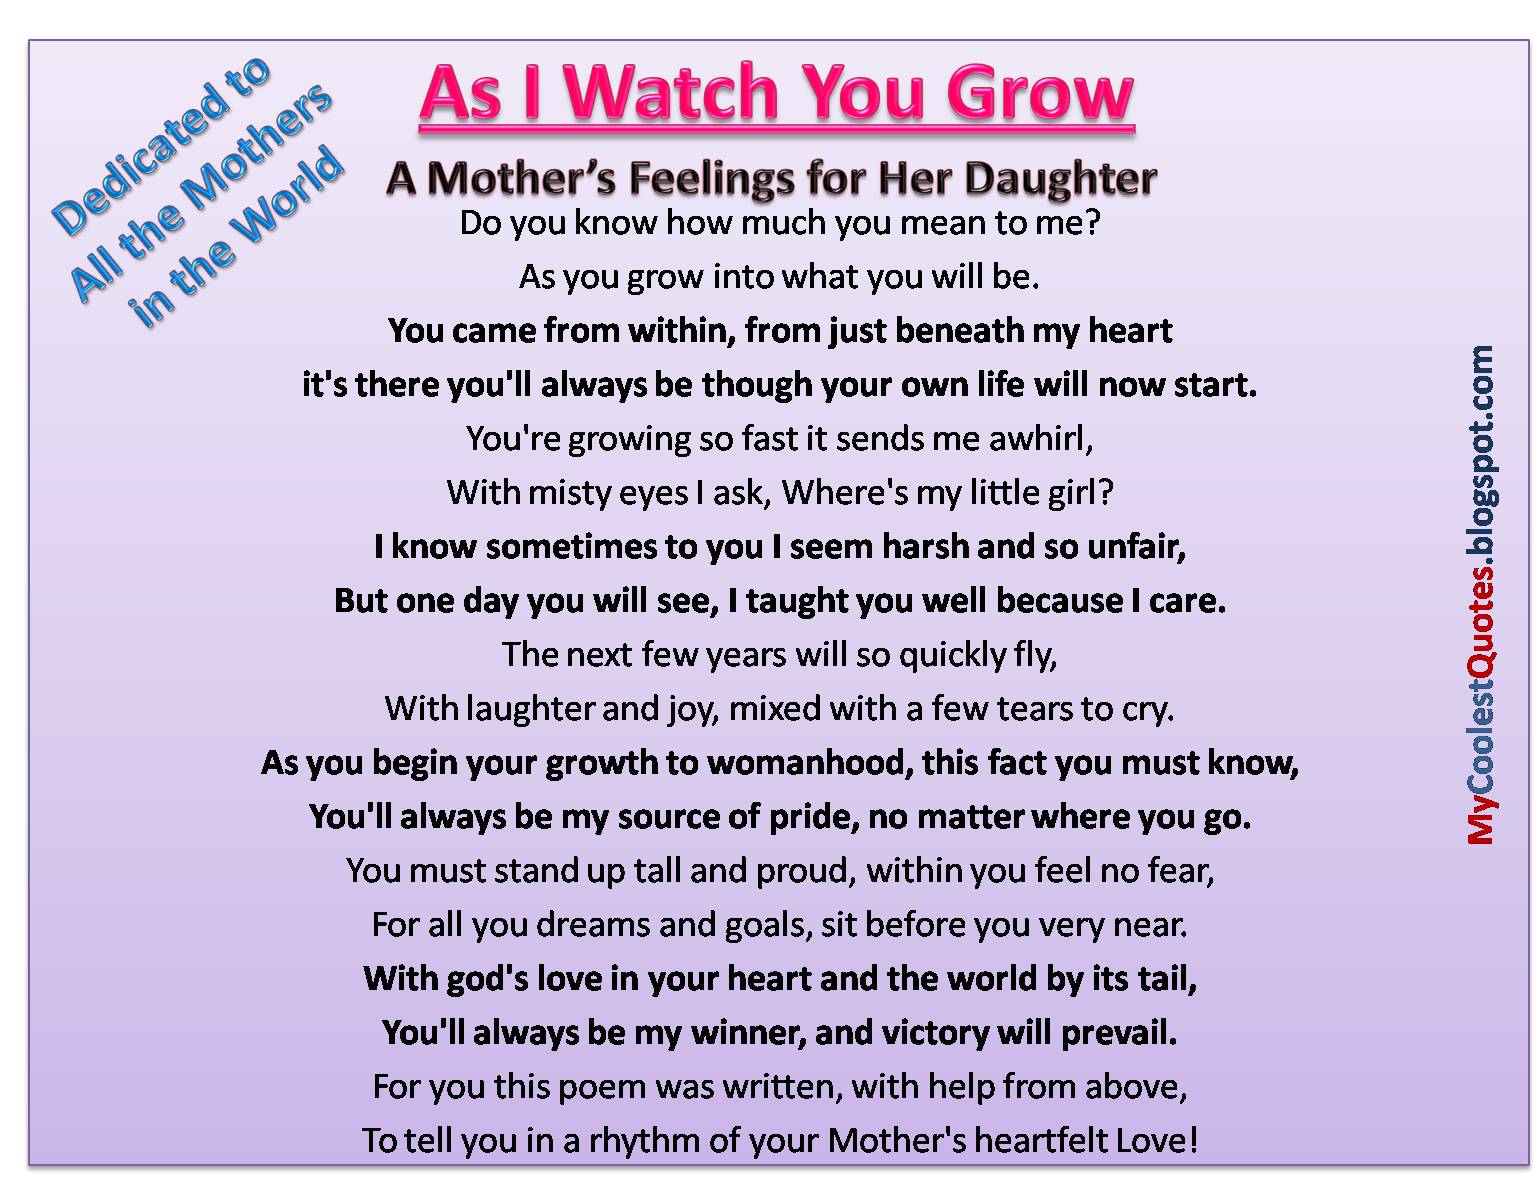 A Mother s Feelings for Her Daughter AS I WATCH YOU GROW Do you know how much